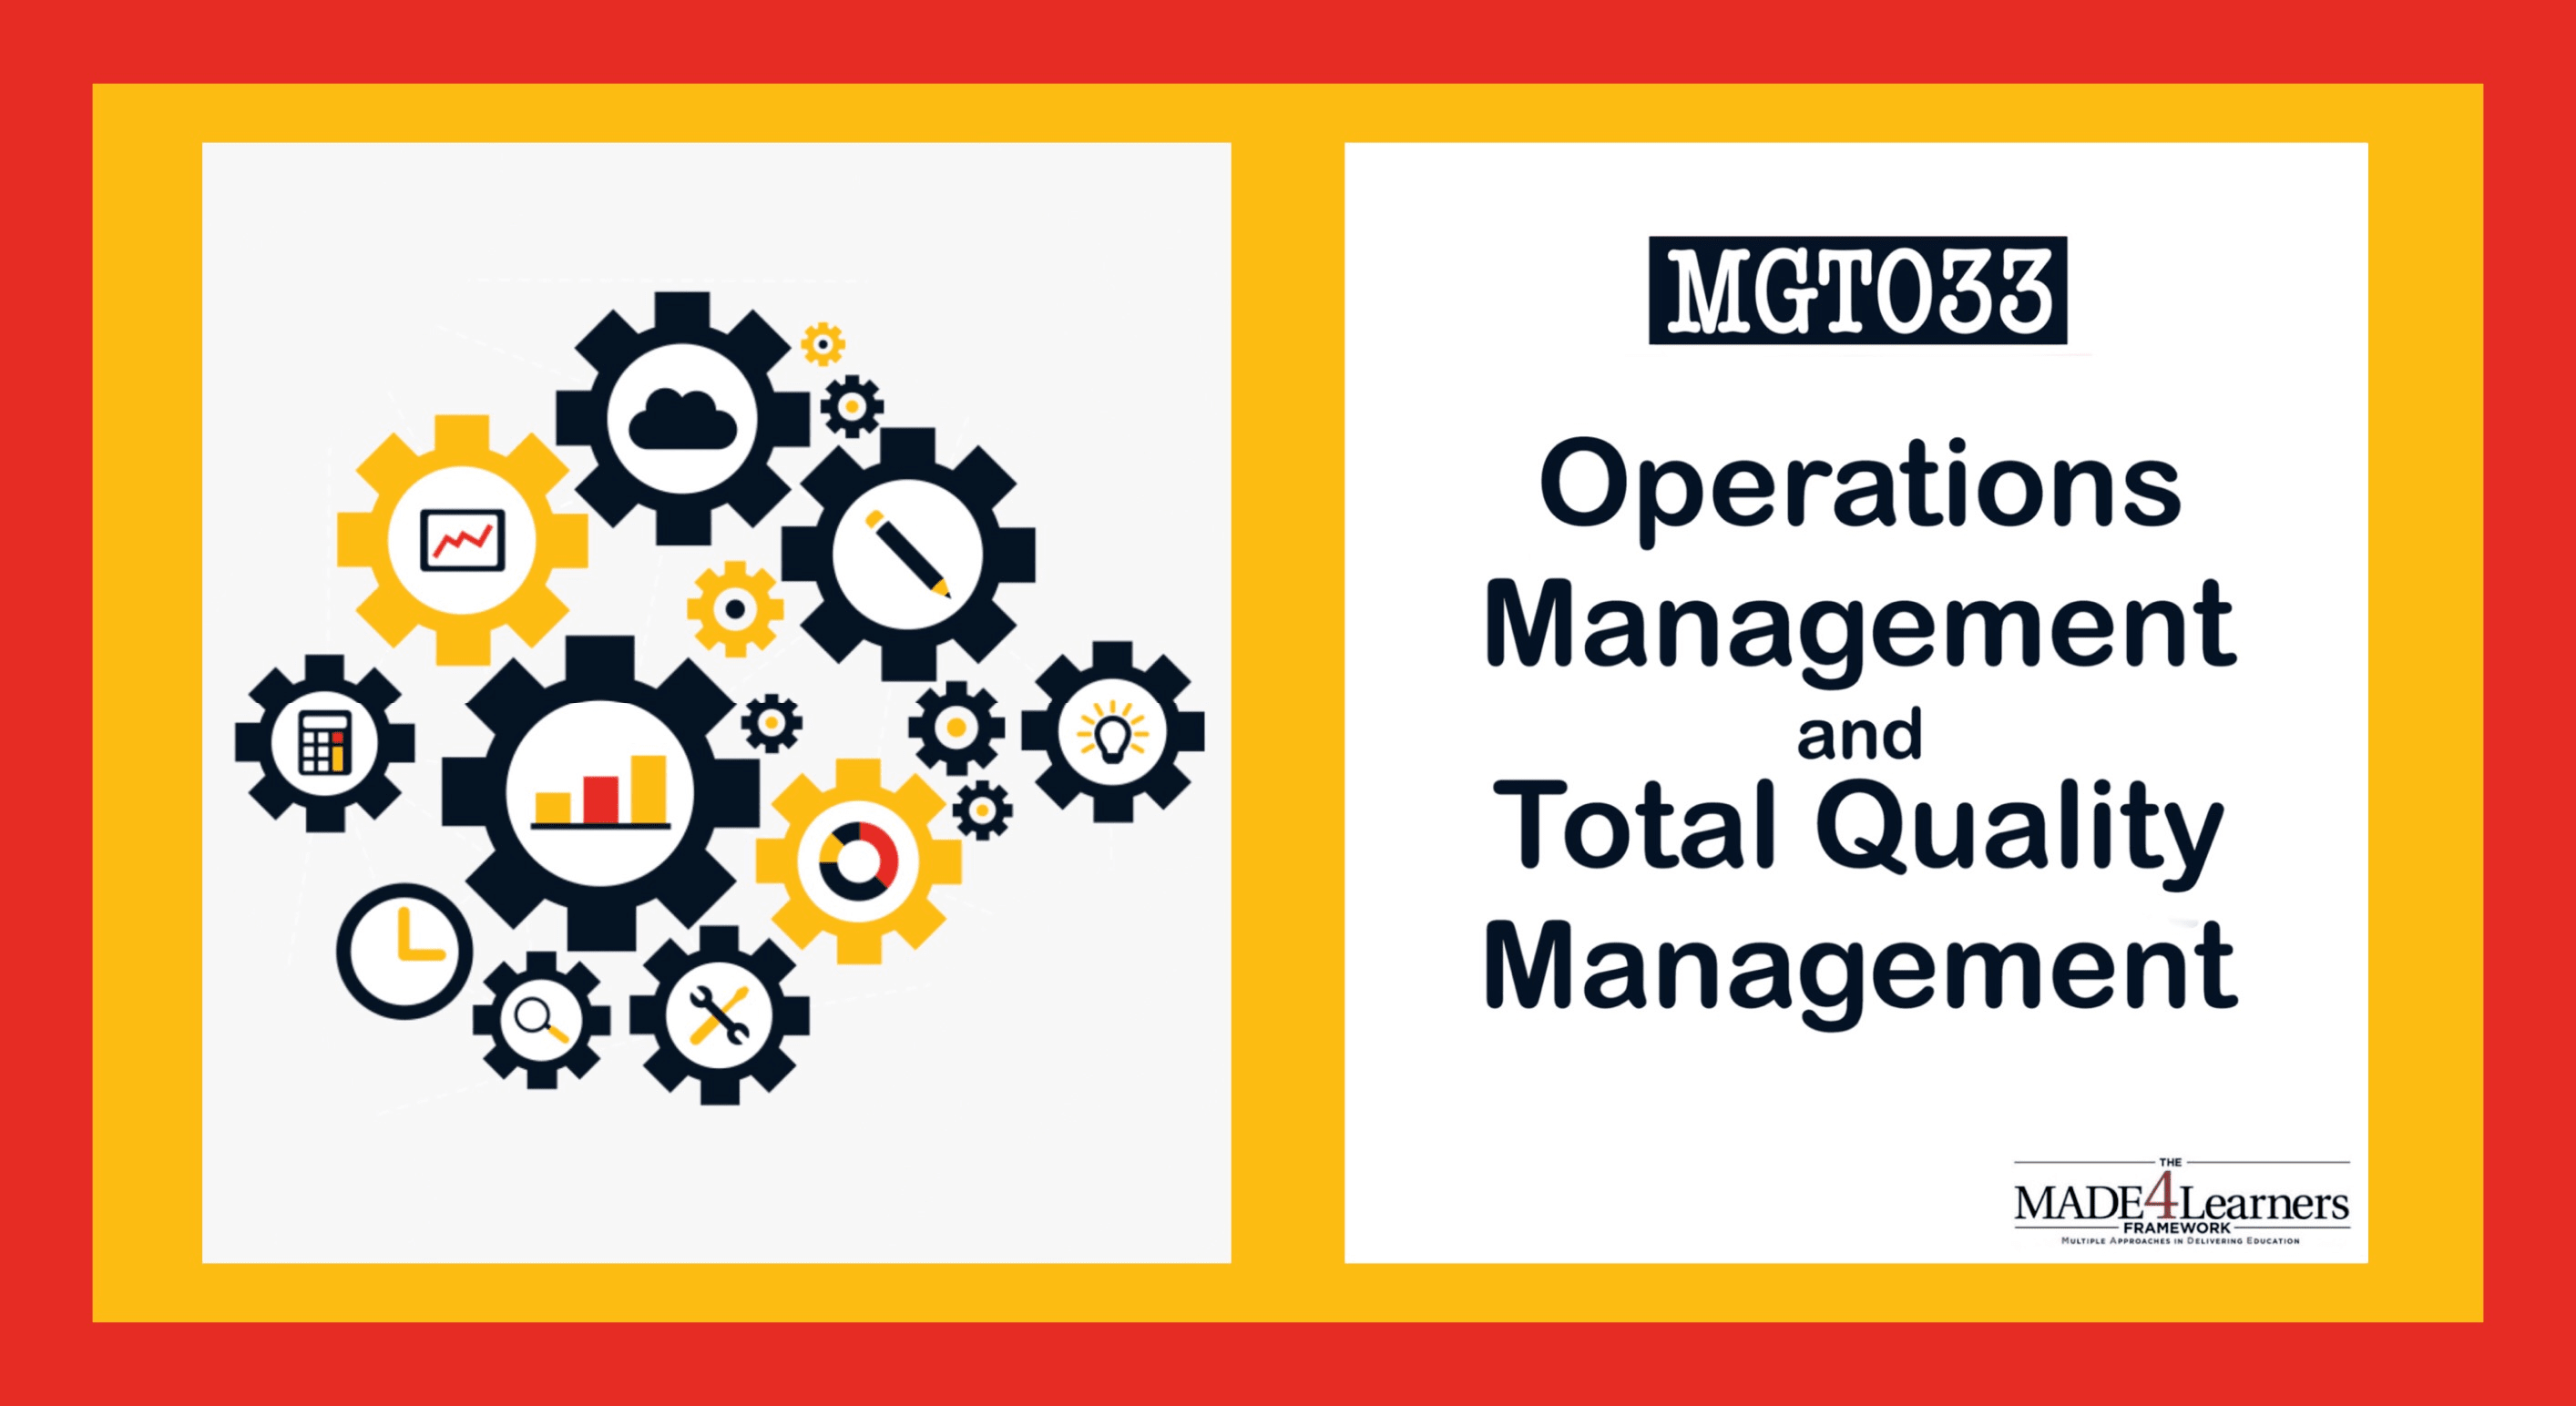 MGT033-Operation Management and Total Quality Management(B1_MKM/B3_HR/B3)